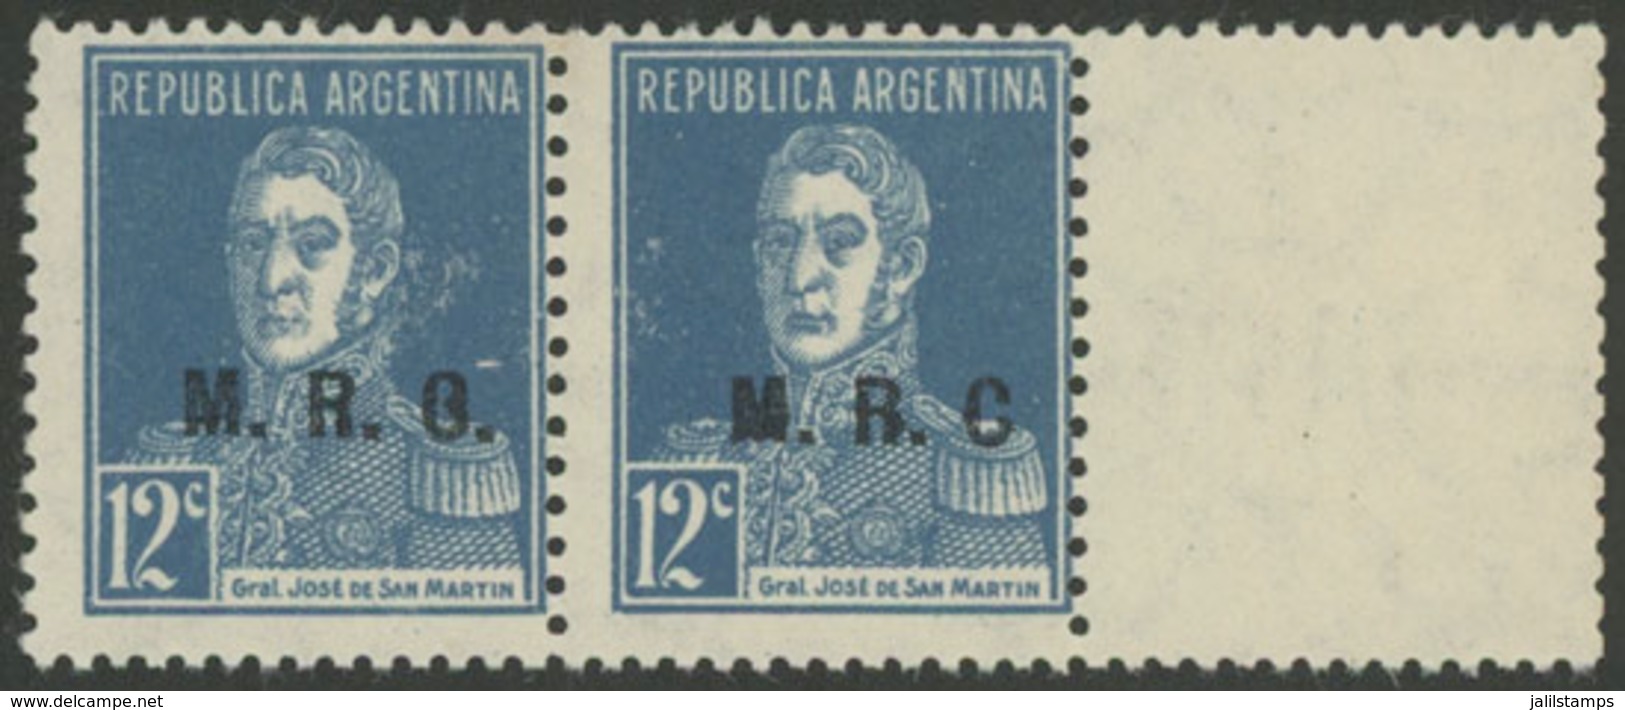 393 ARGENTINA: GJ.606CD, With LABEL AT RIGHT, VF Quality! - Oficiales